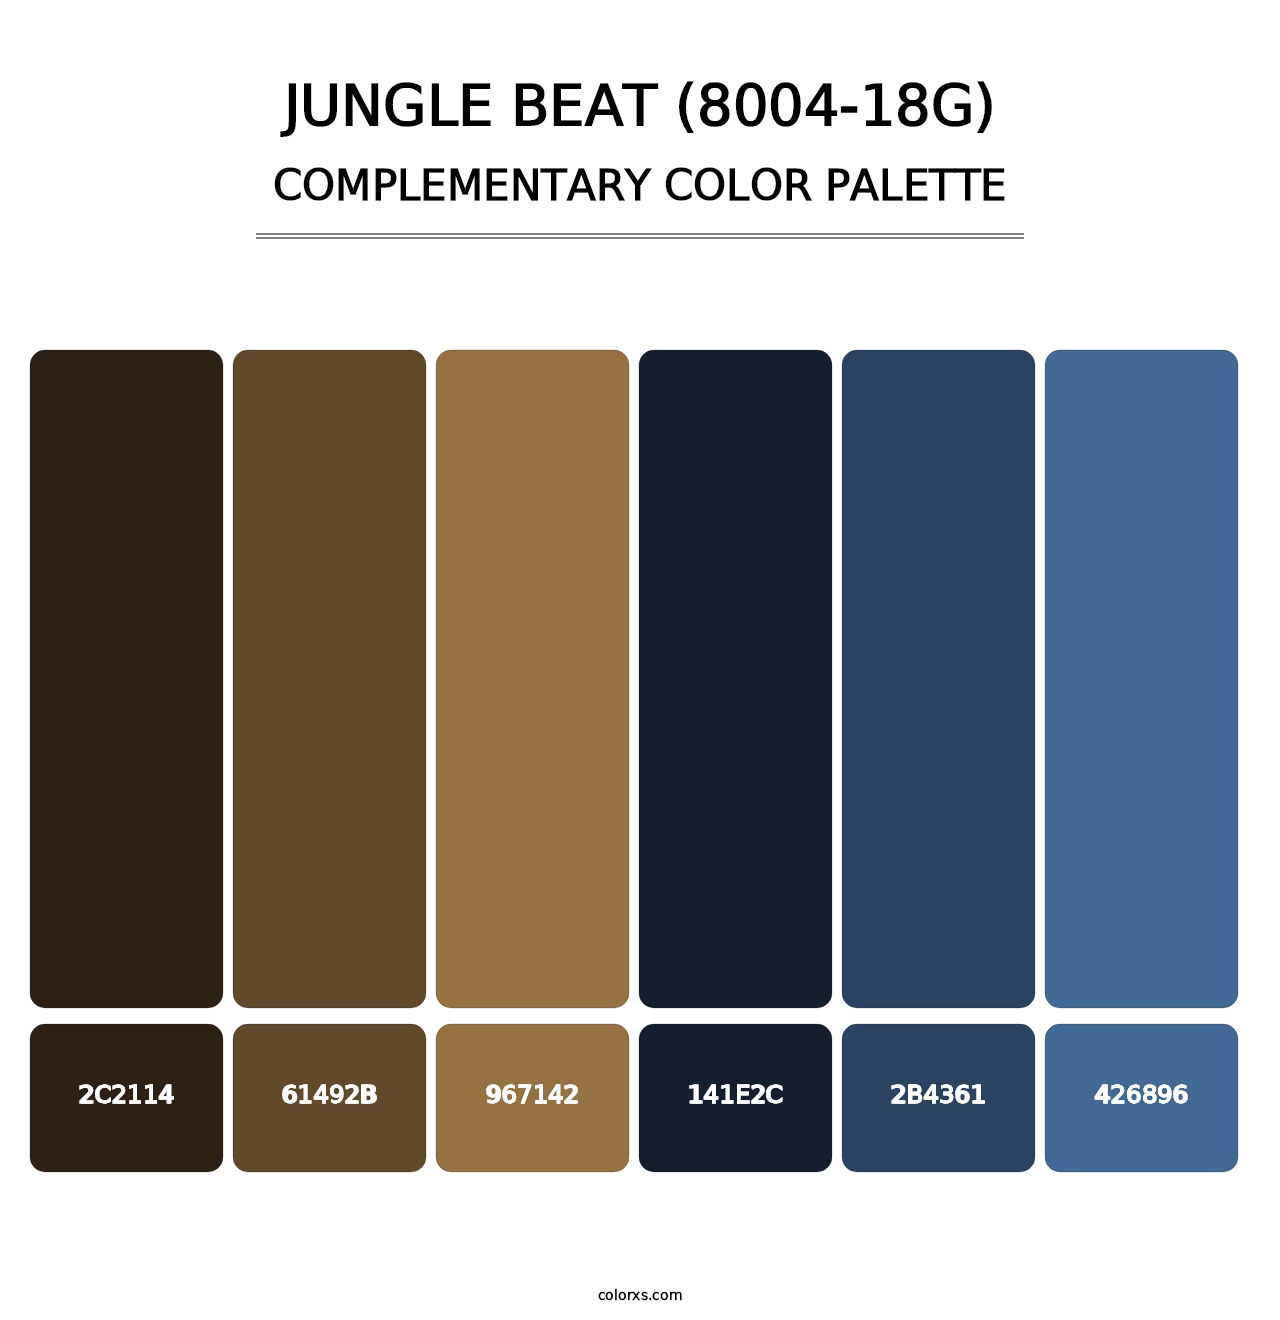 Jungle Beat (8004-18G) - Complementary Color Palette